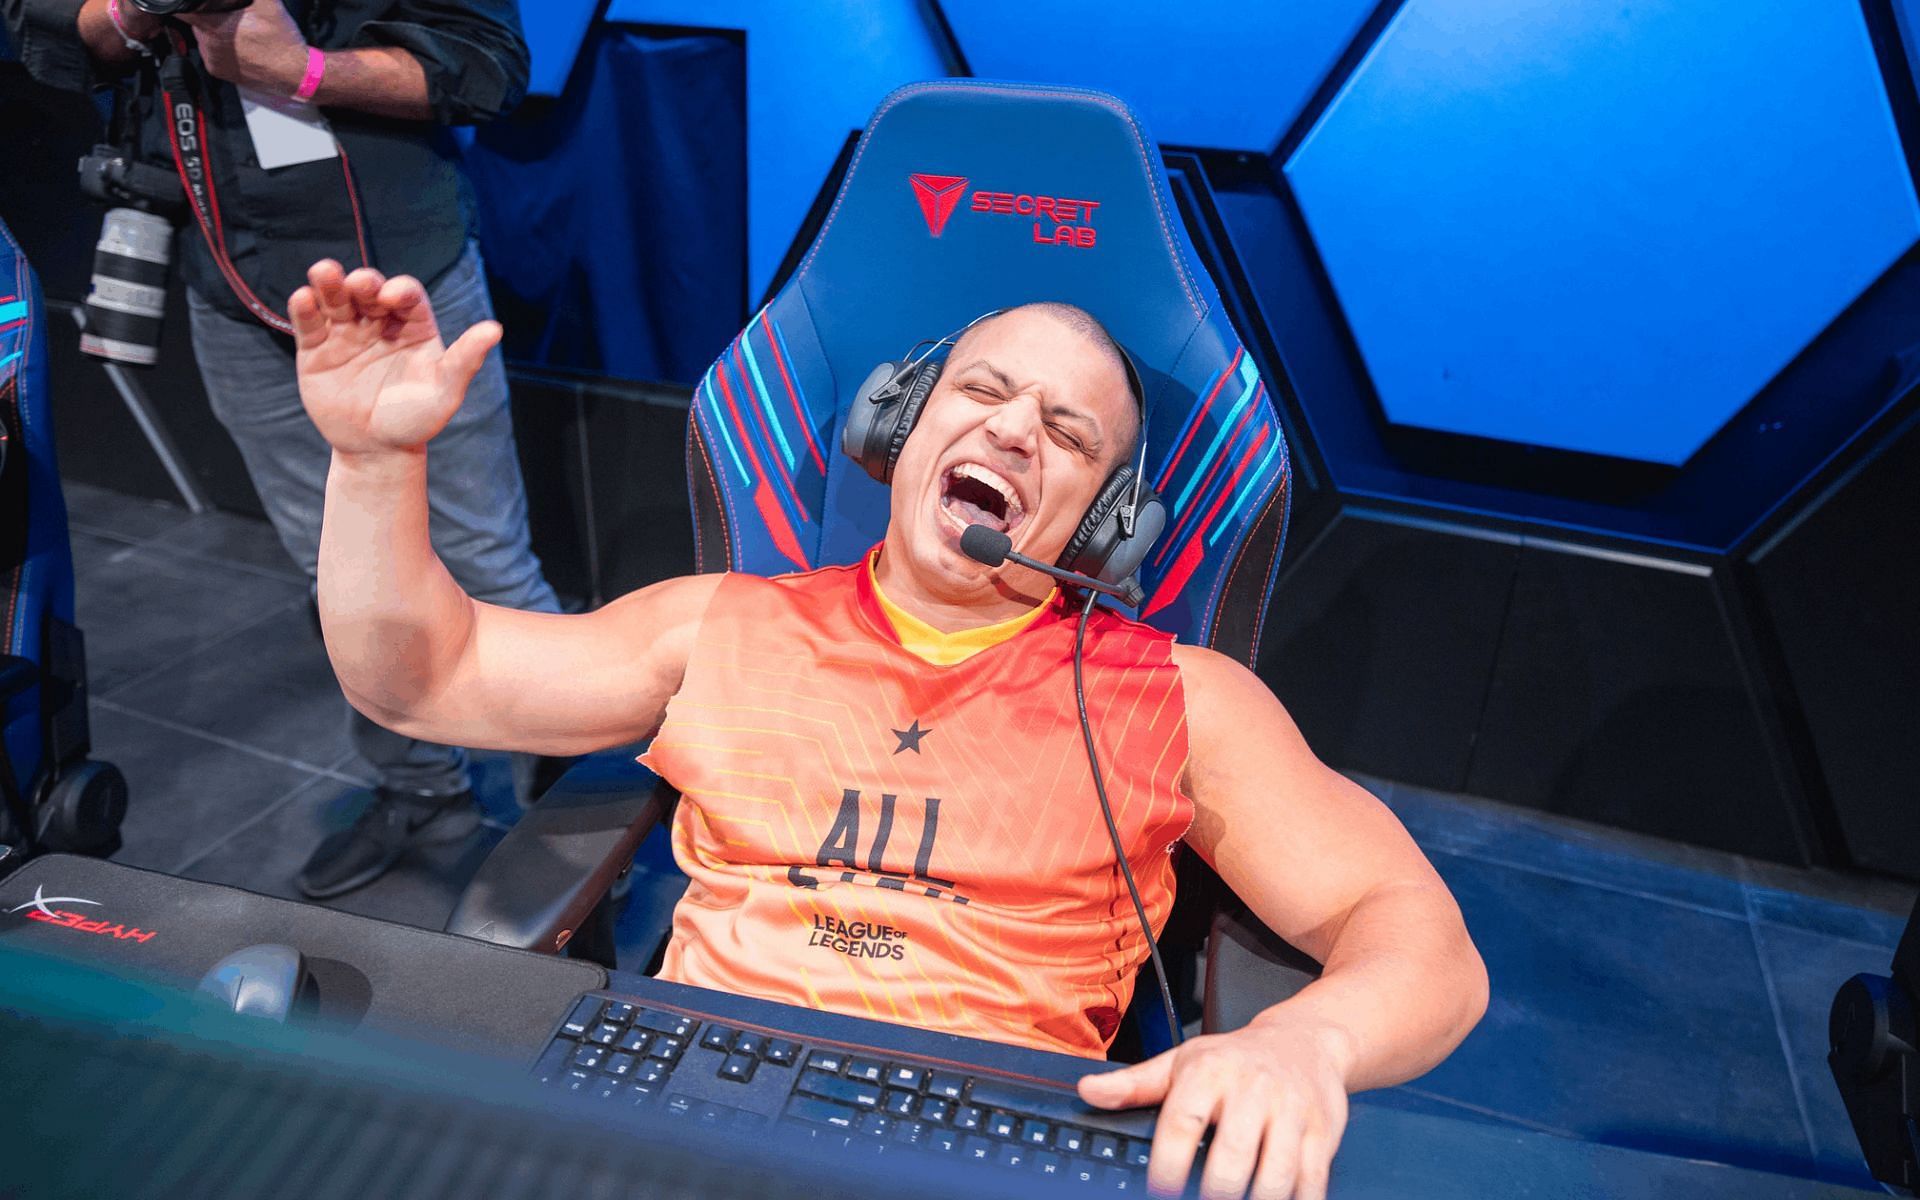 Tyler1 lashes out at persistent viewer (Image via Tina Jo, Riot Games)